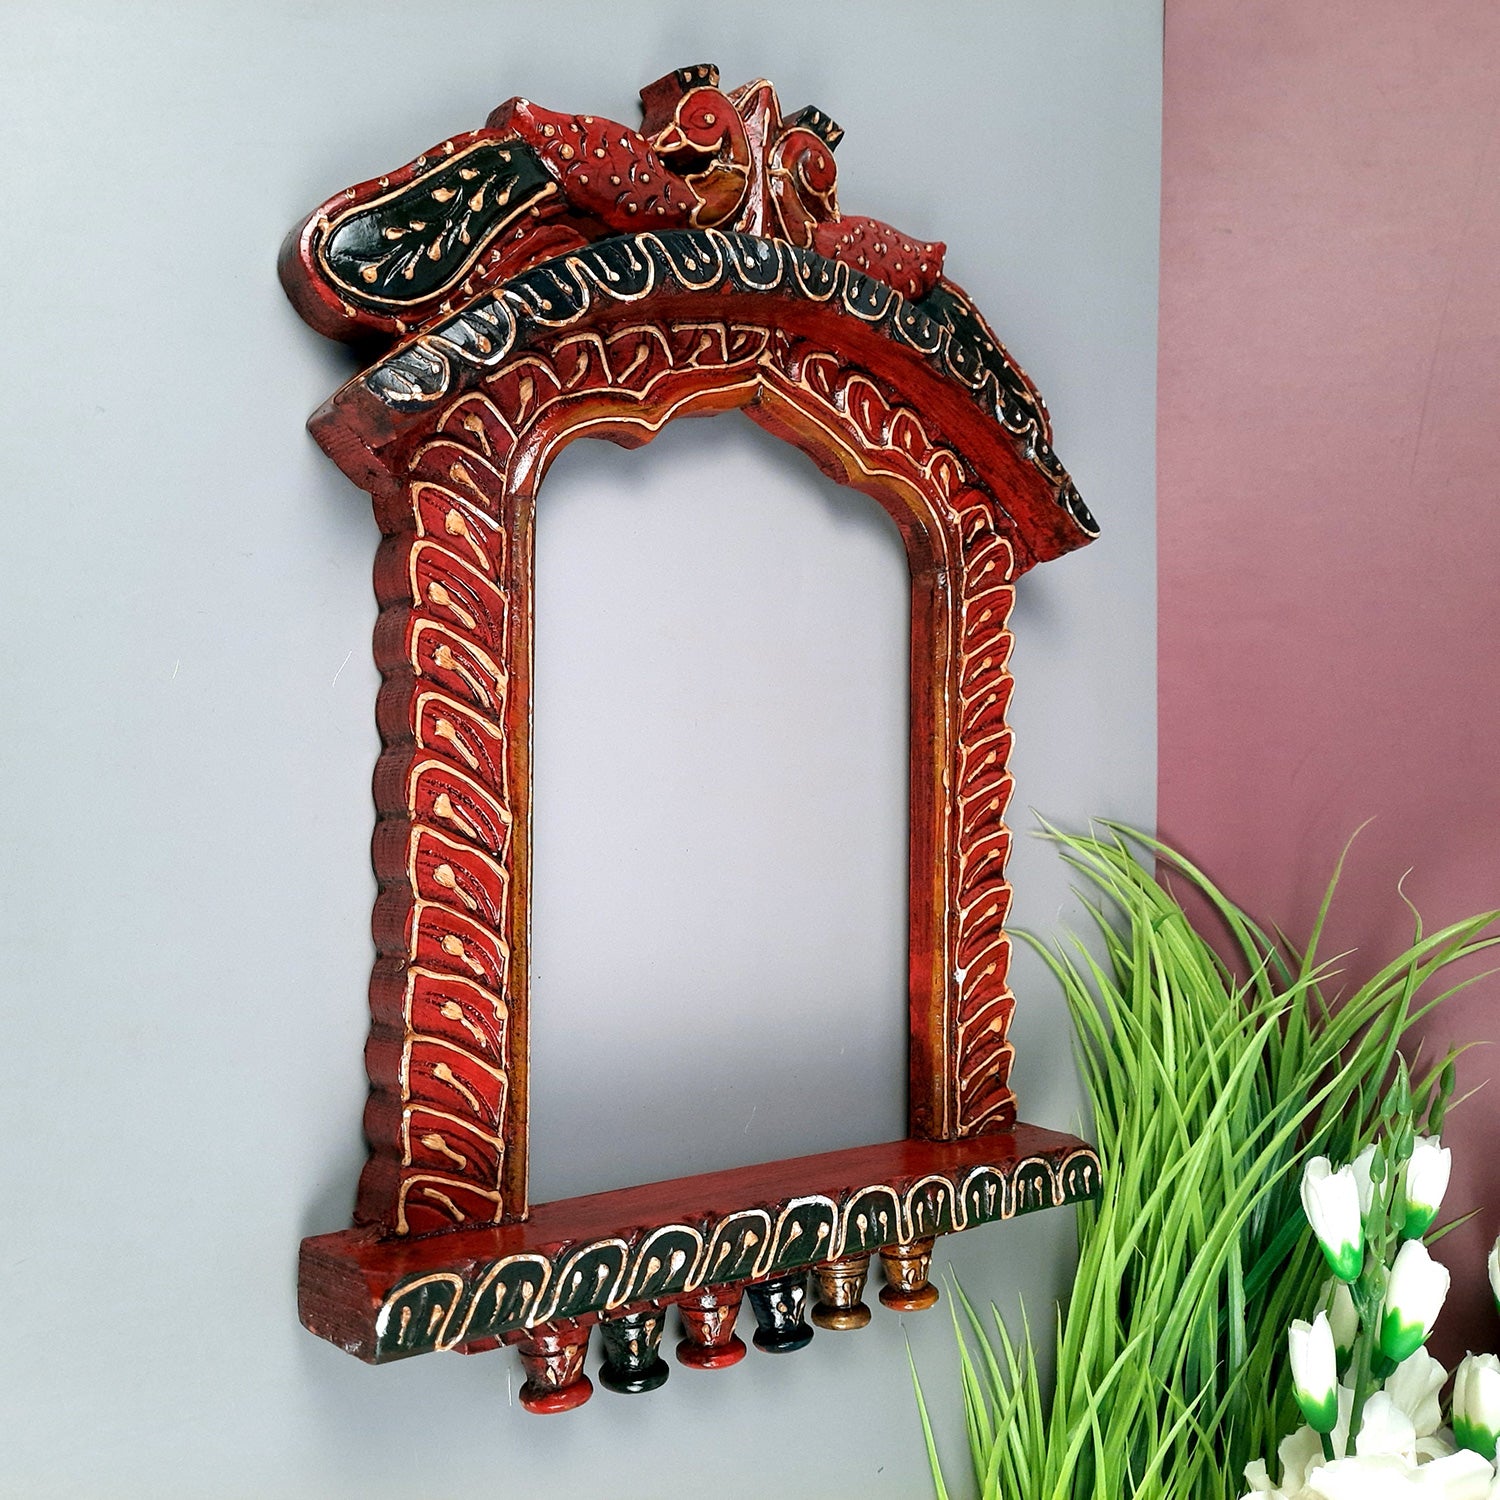 Jharokha Wooden Wall Hanging | Jharokha Frame Hangings - For Home, Wall Decor, Living room, Entrance Decoration & Gifts - 17 Inch - Apkamart